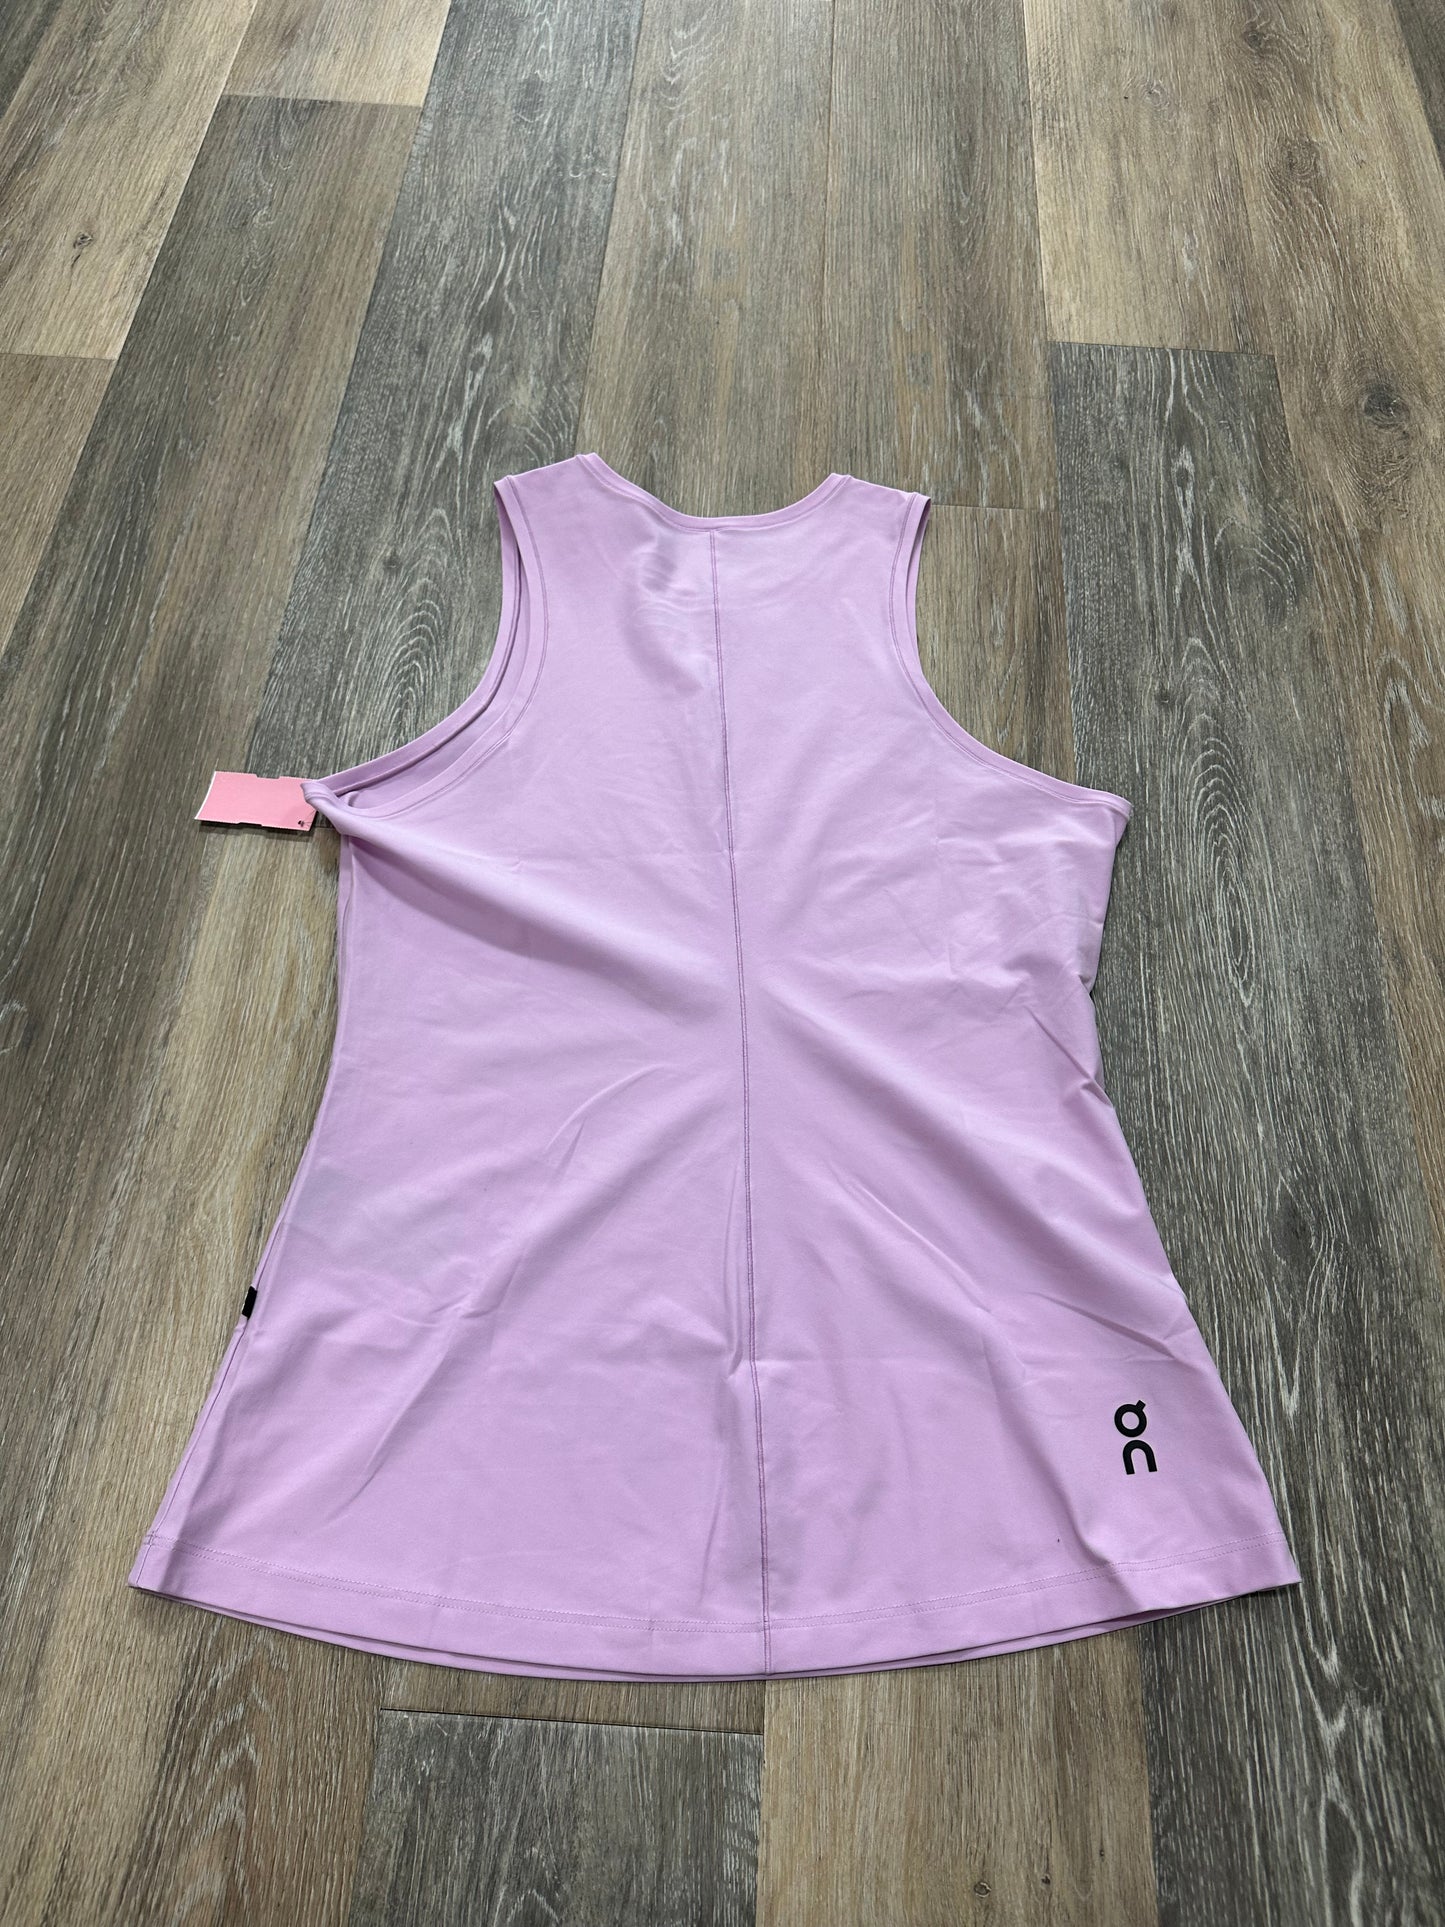 Athletic Tank Top By On Cloud  Size: L